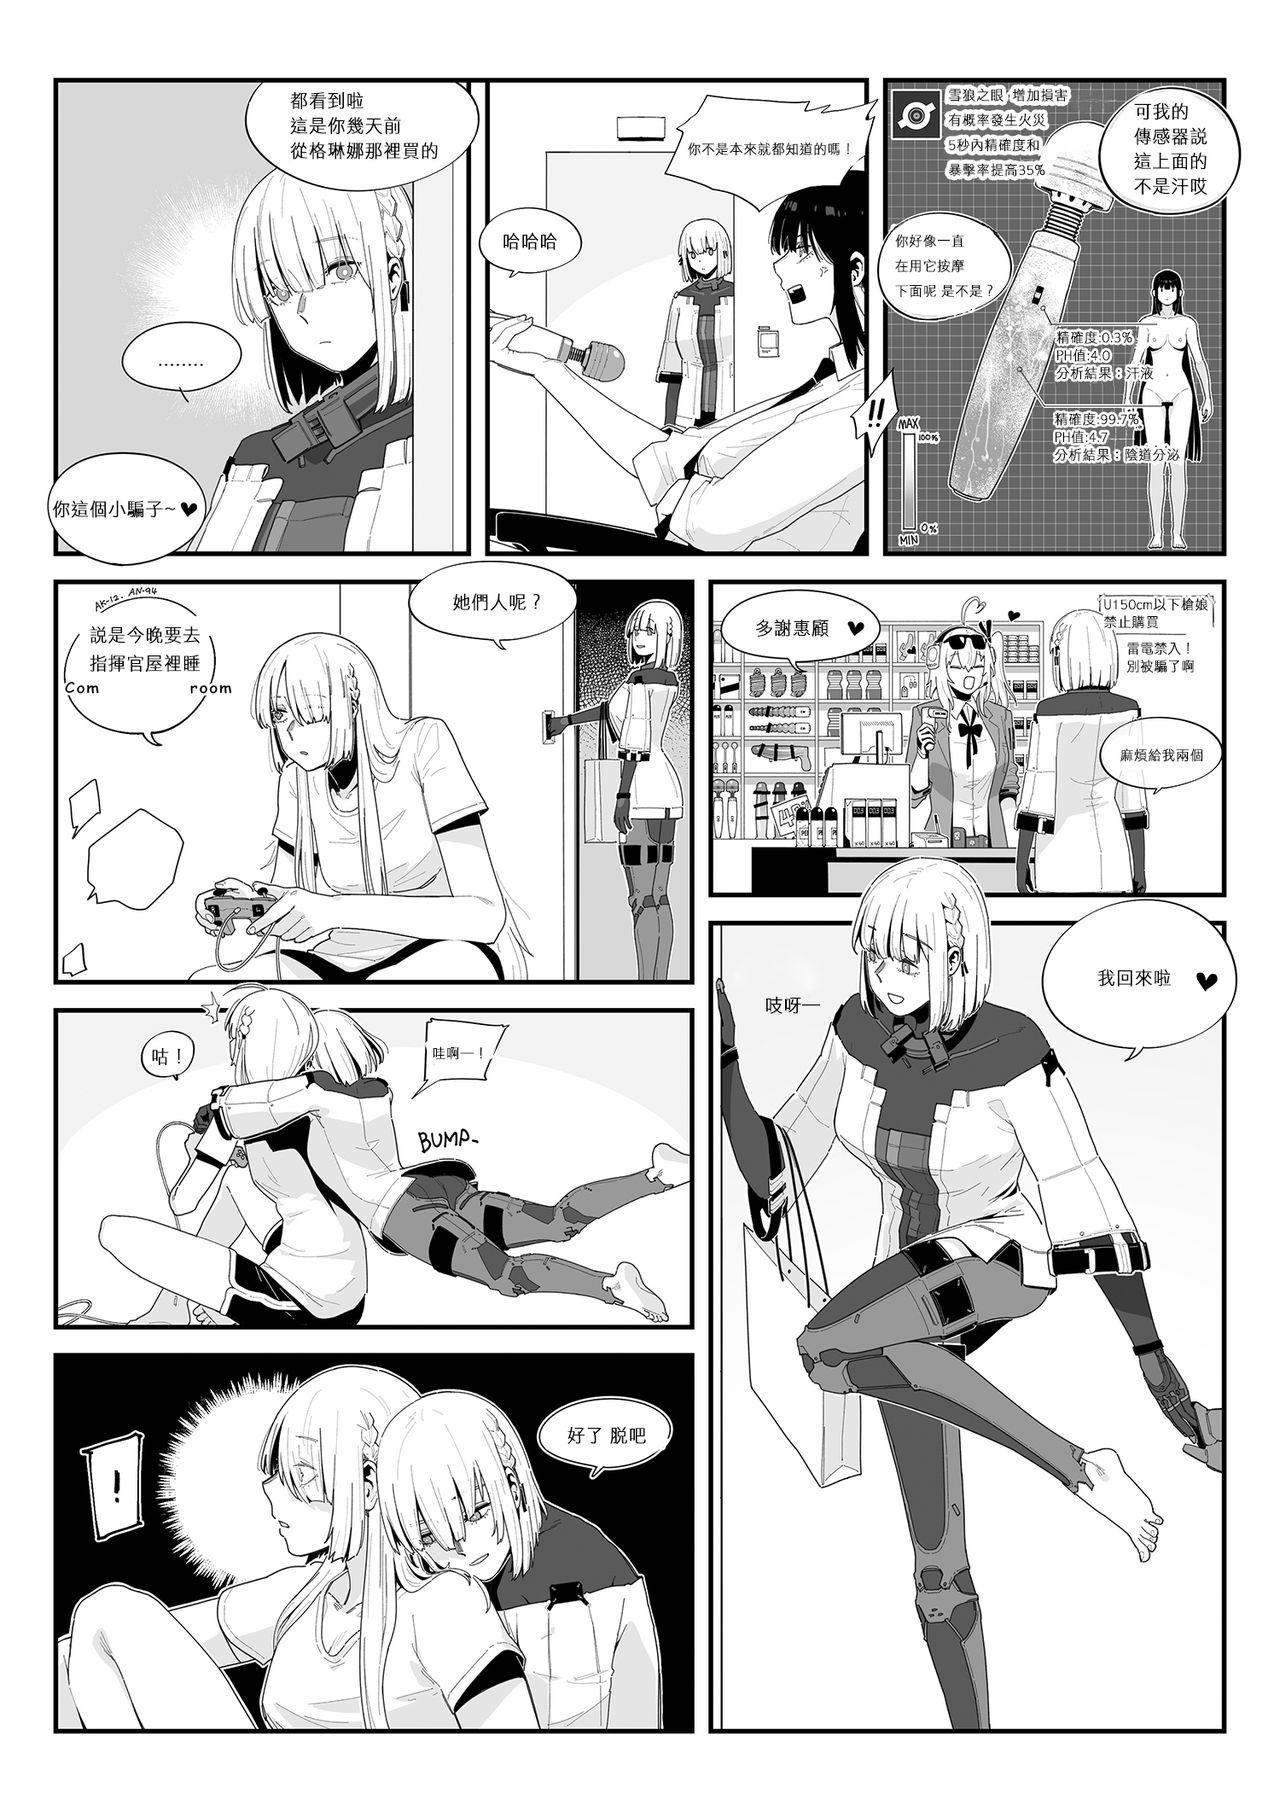 Free Blowjobs Crazy dog 2 - Girls frontline Family - Page 3